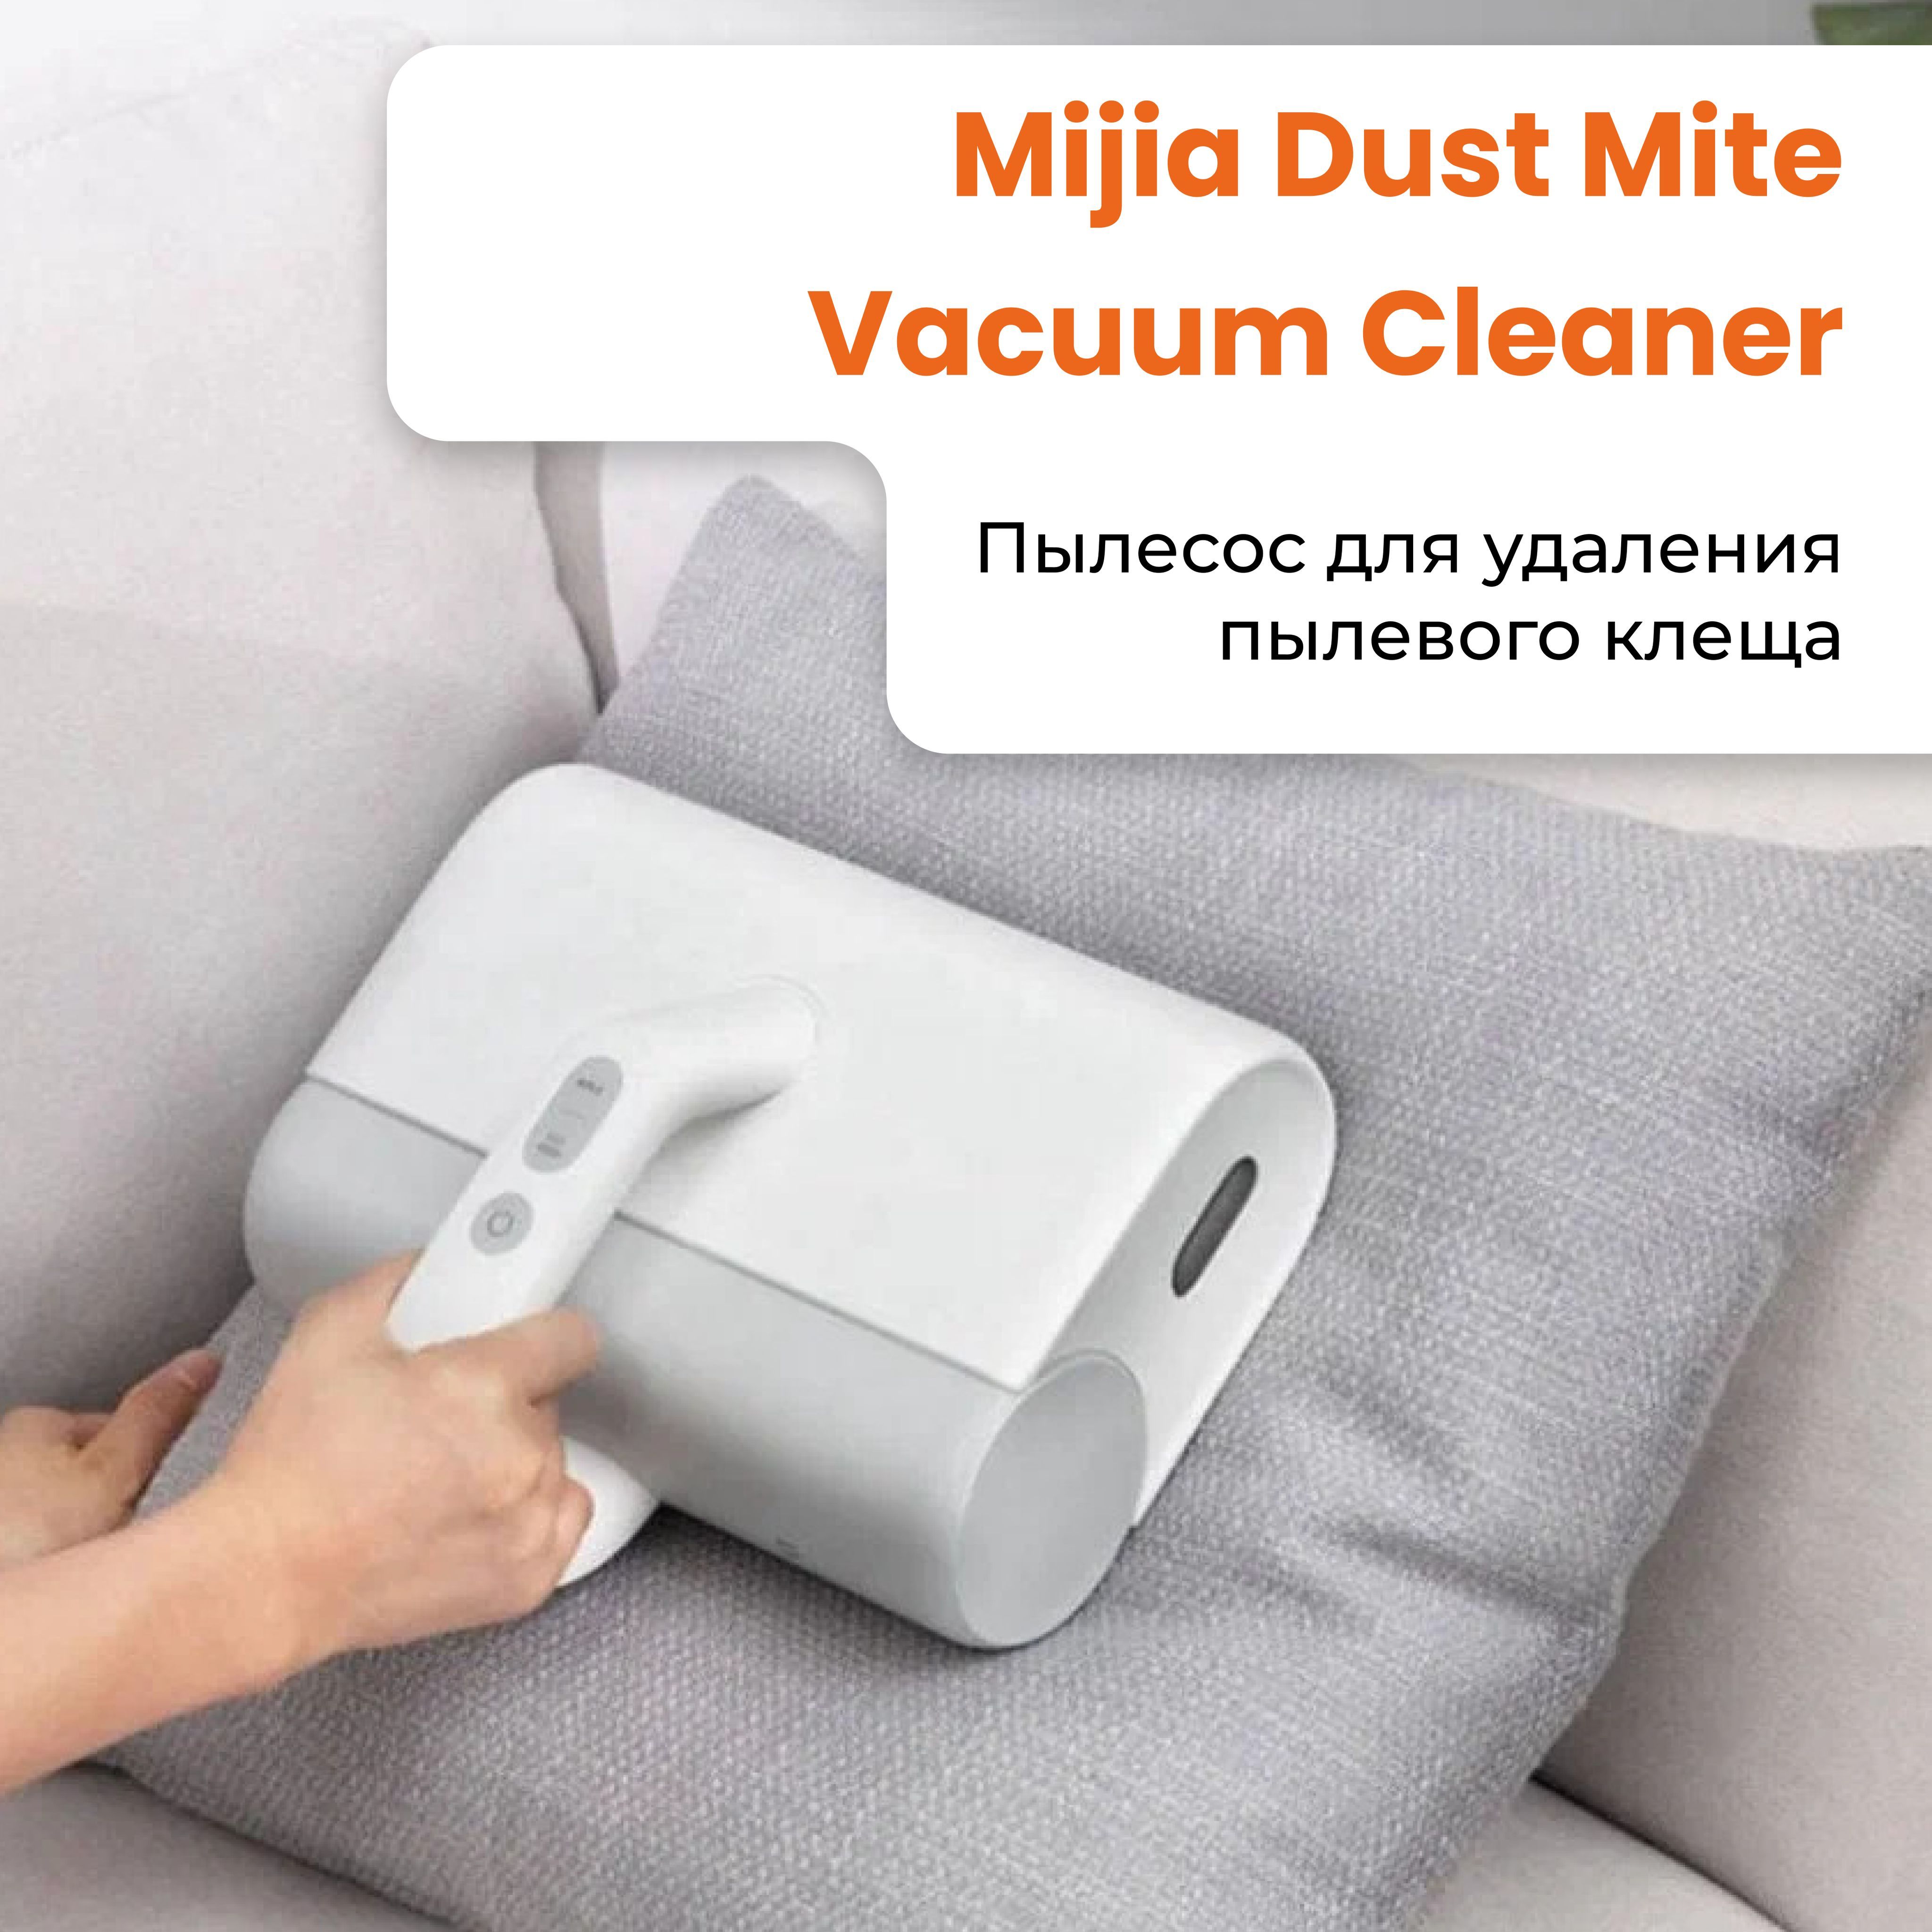 Xiaomi dust mite vacuum cleaner mjcmy01dy. Xiaomi mjcmy01dy. Пылесос Xiaomi (mjcmy01dy). Xiaomi Dust Mite Vacuum. Xiaomi Dust Mite Vacuum вилка.